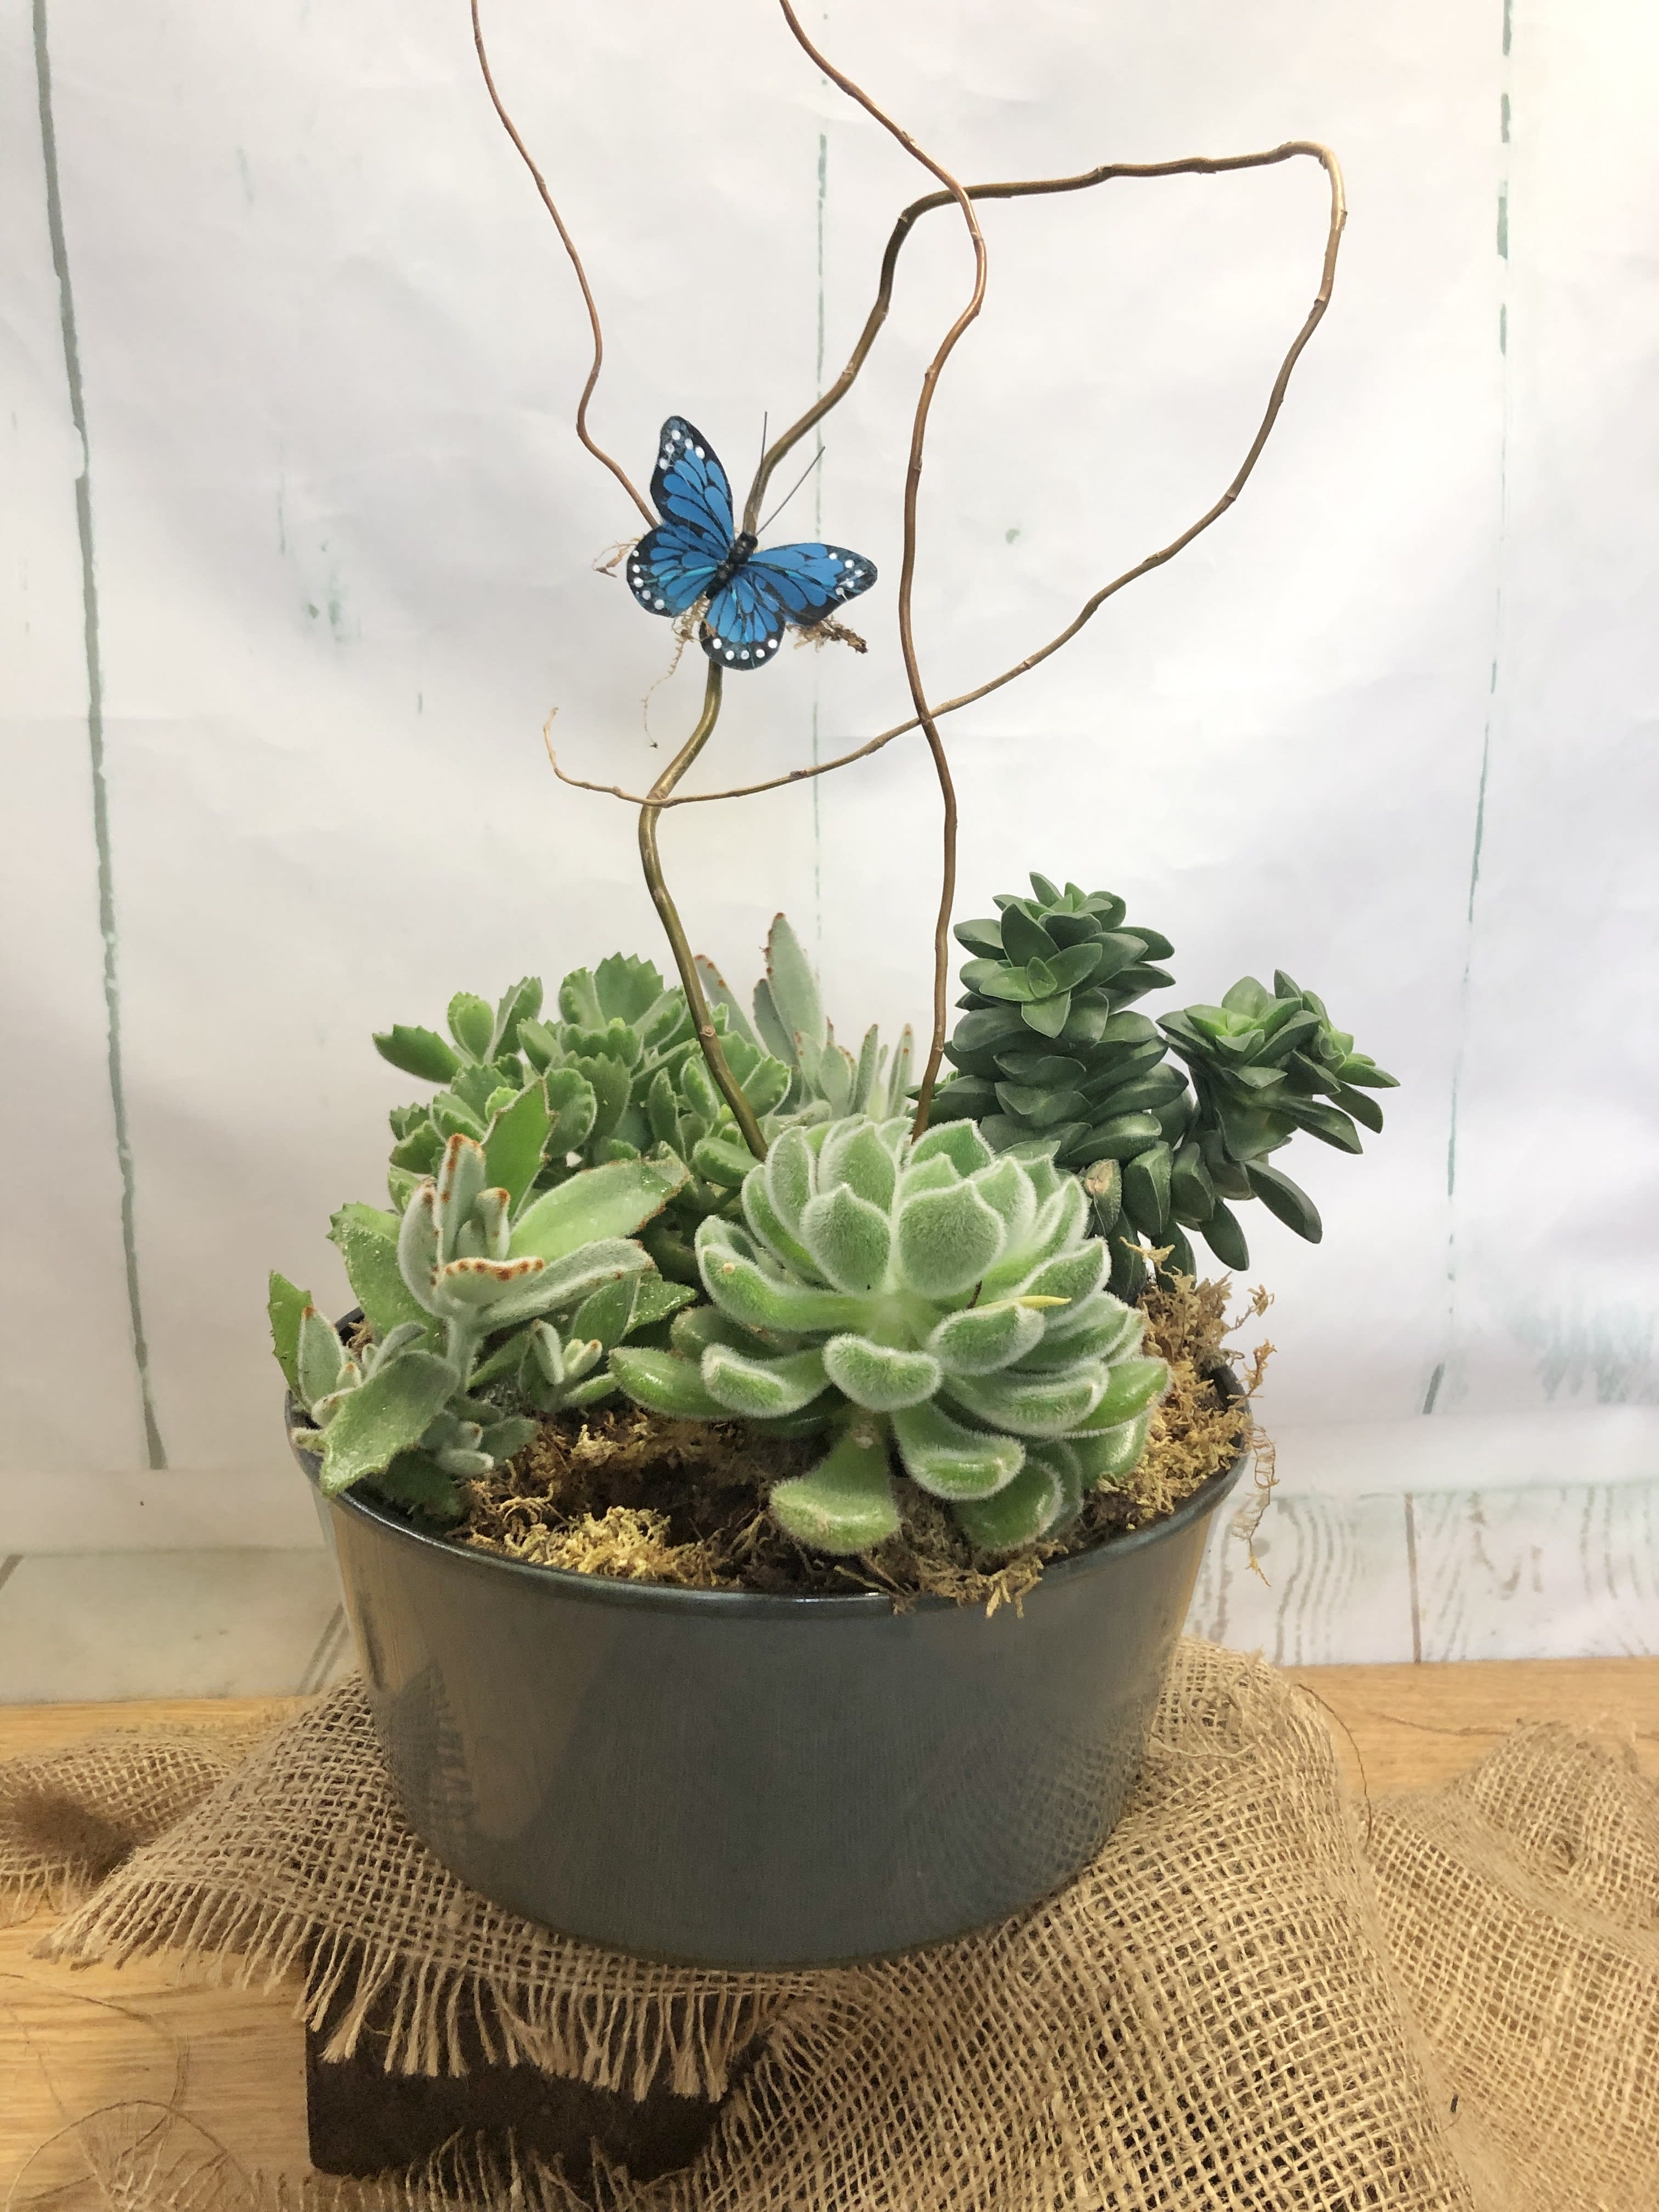 Succulent Garden - A combination of unique and fun succulents make this a perfect gift for any occasion - housewarming, new office, birthday or get well. Each garden will be planted with a variety of plants available in our greenhouses at the time of your order.